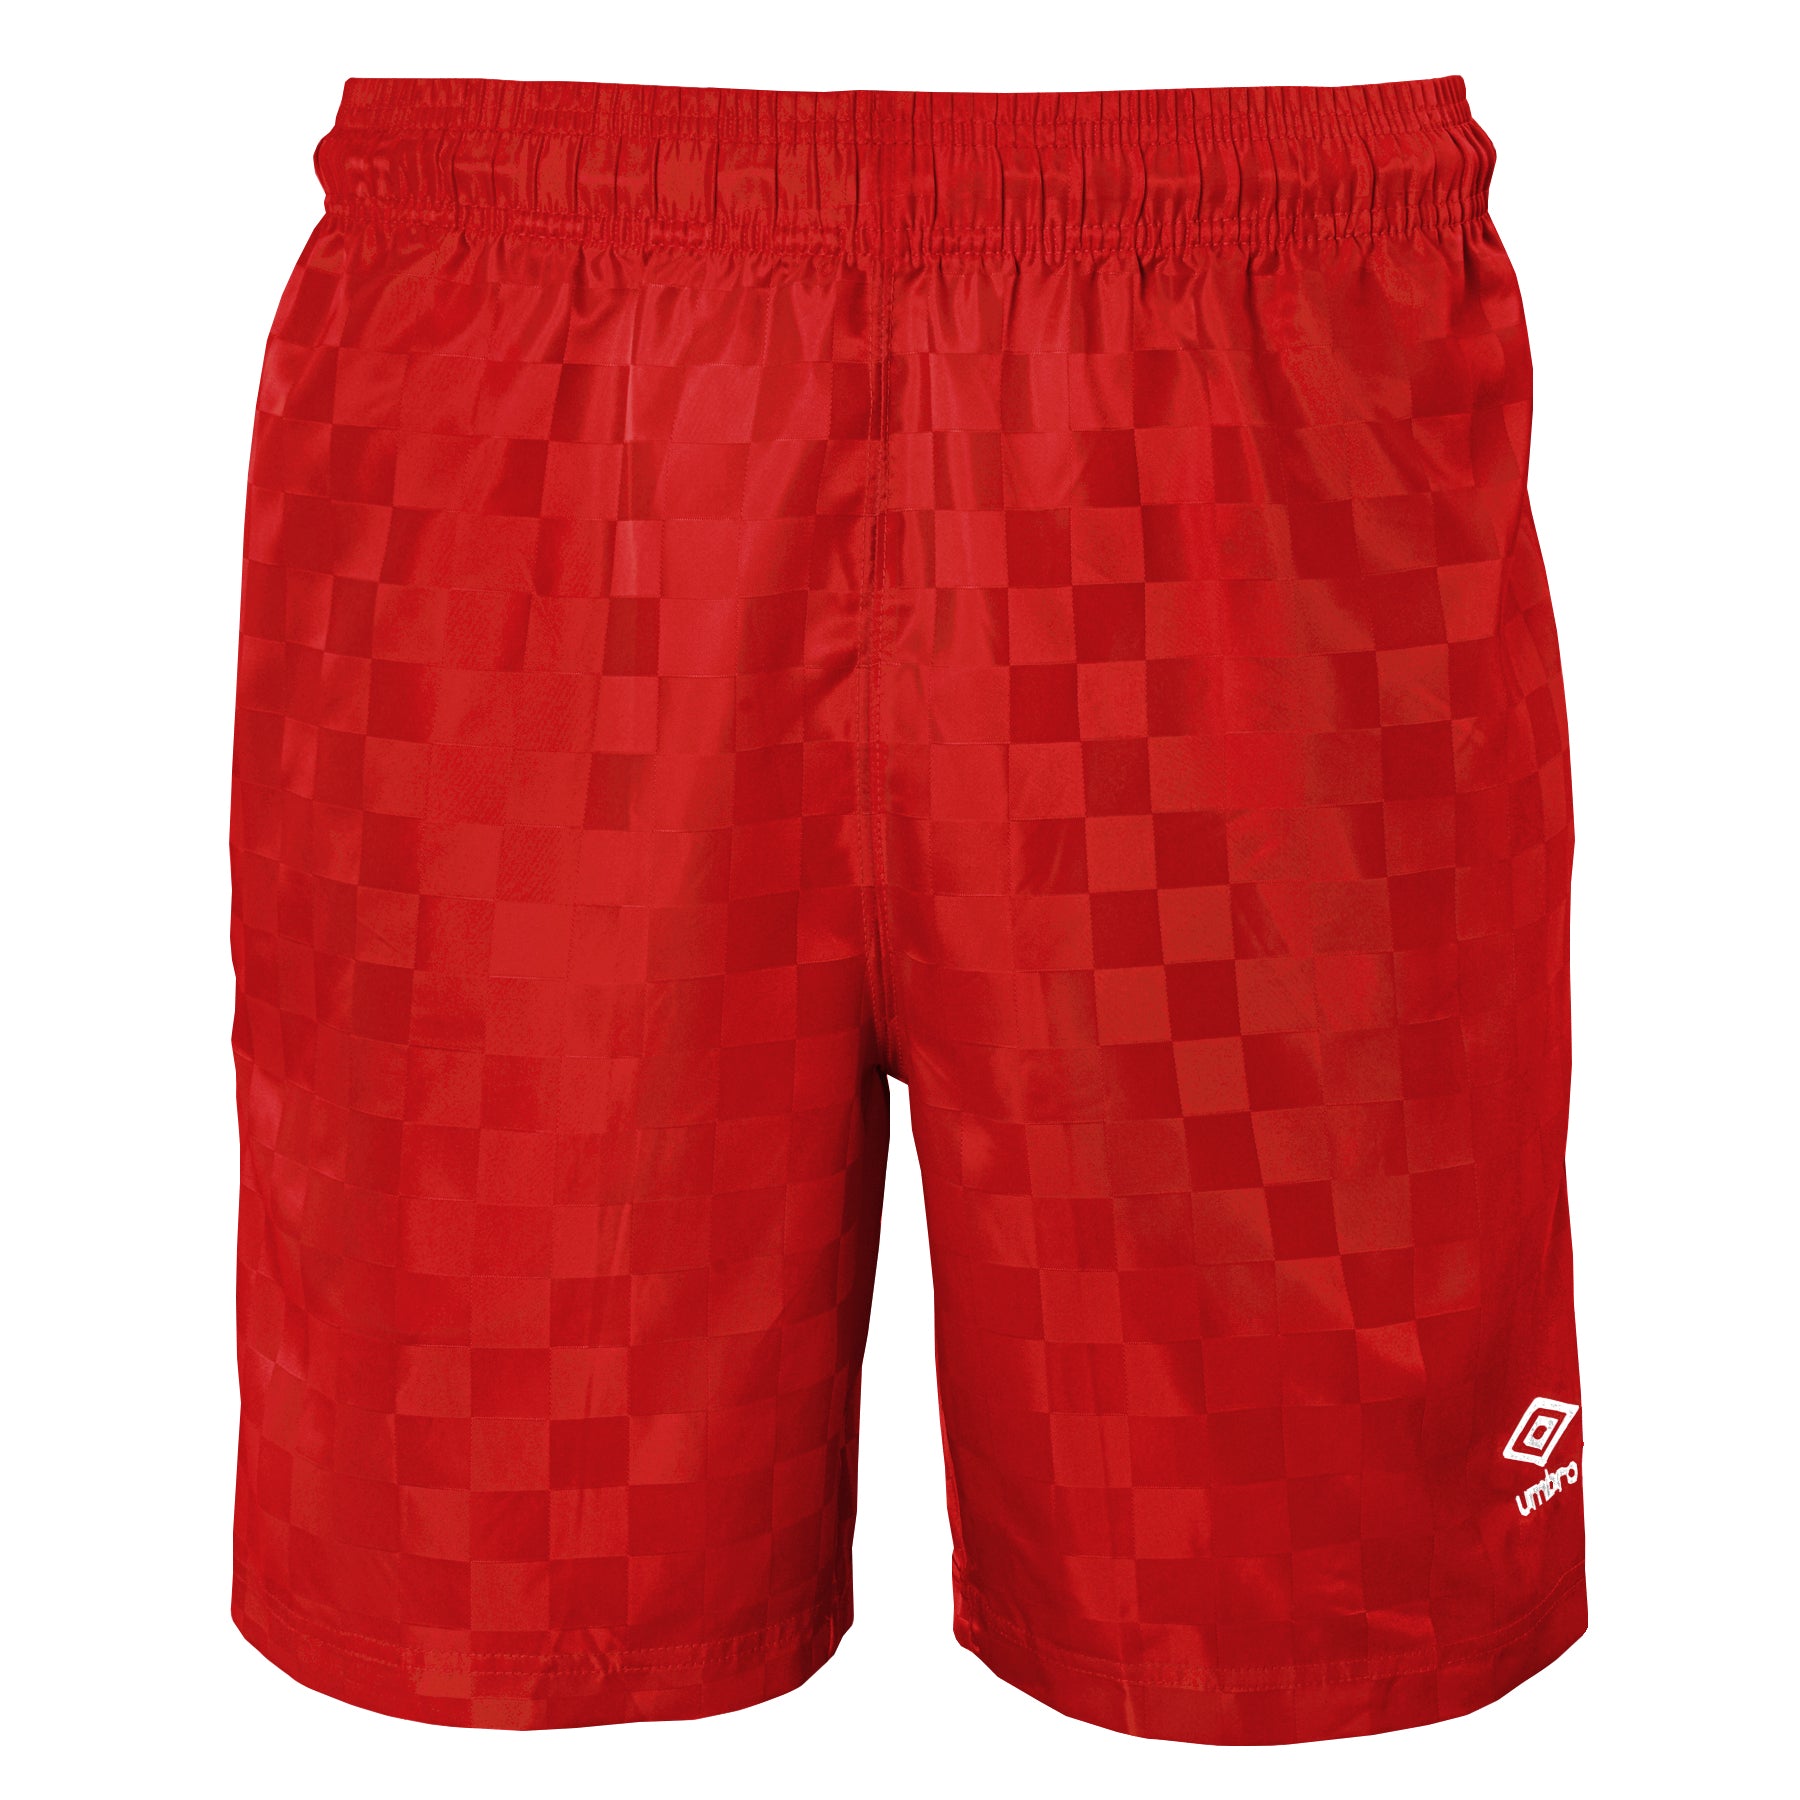 CHECKERBOARD SHORT-YOUTH